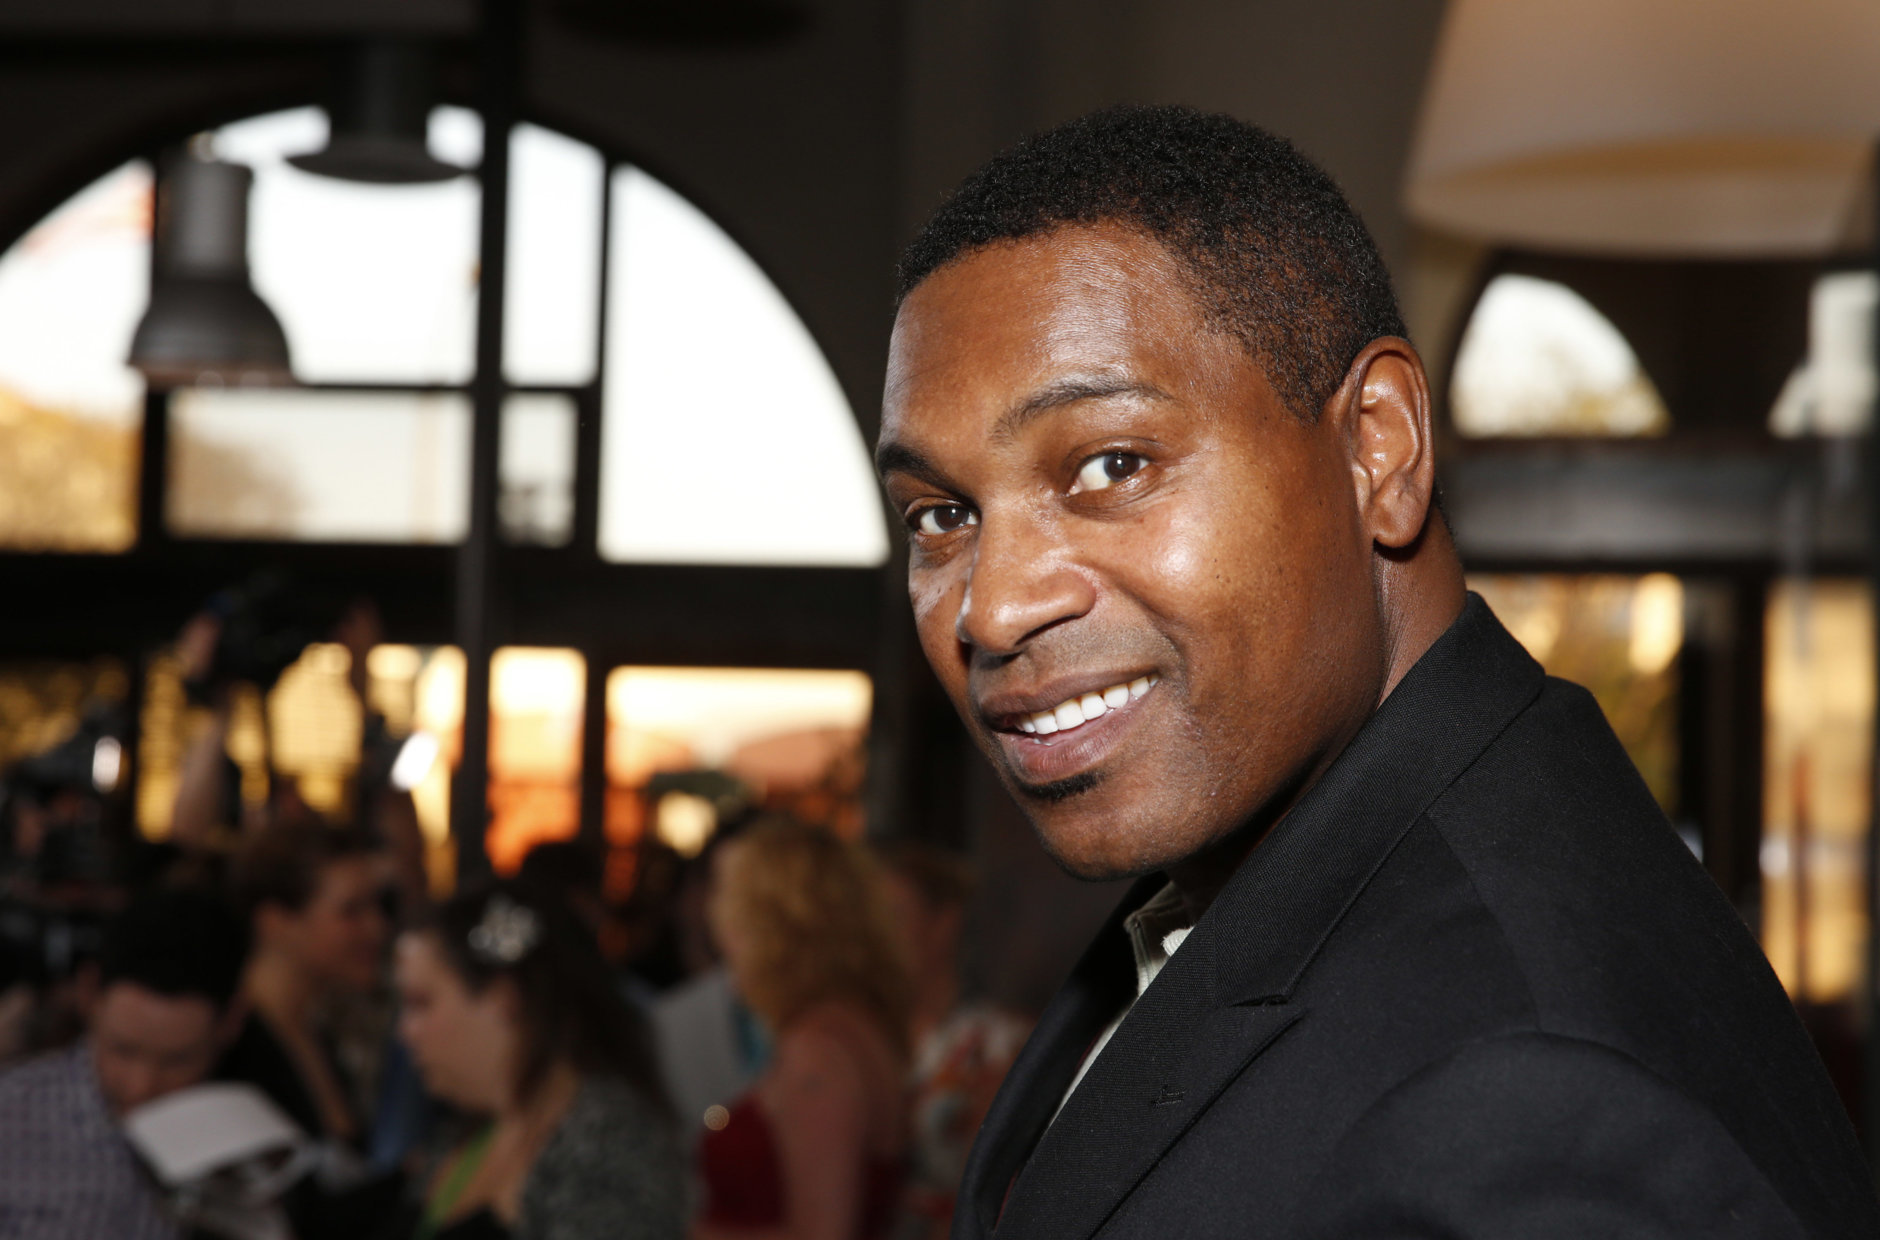 Mykelti Williamson attends the WIGS One Year Anniversary Party on Friday, May, 3, 2013 in Culver City, CA. (Photo by Todd Williamson/Invision for FOX/AP Images)